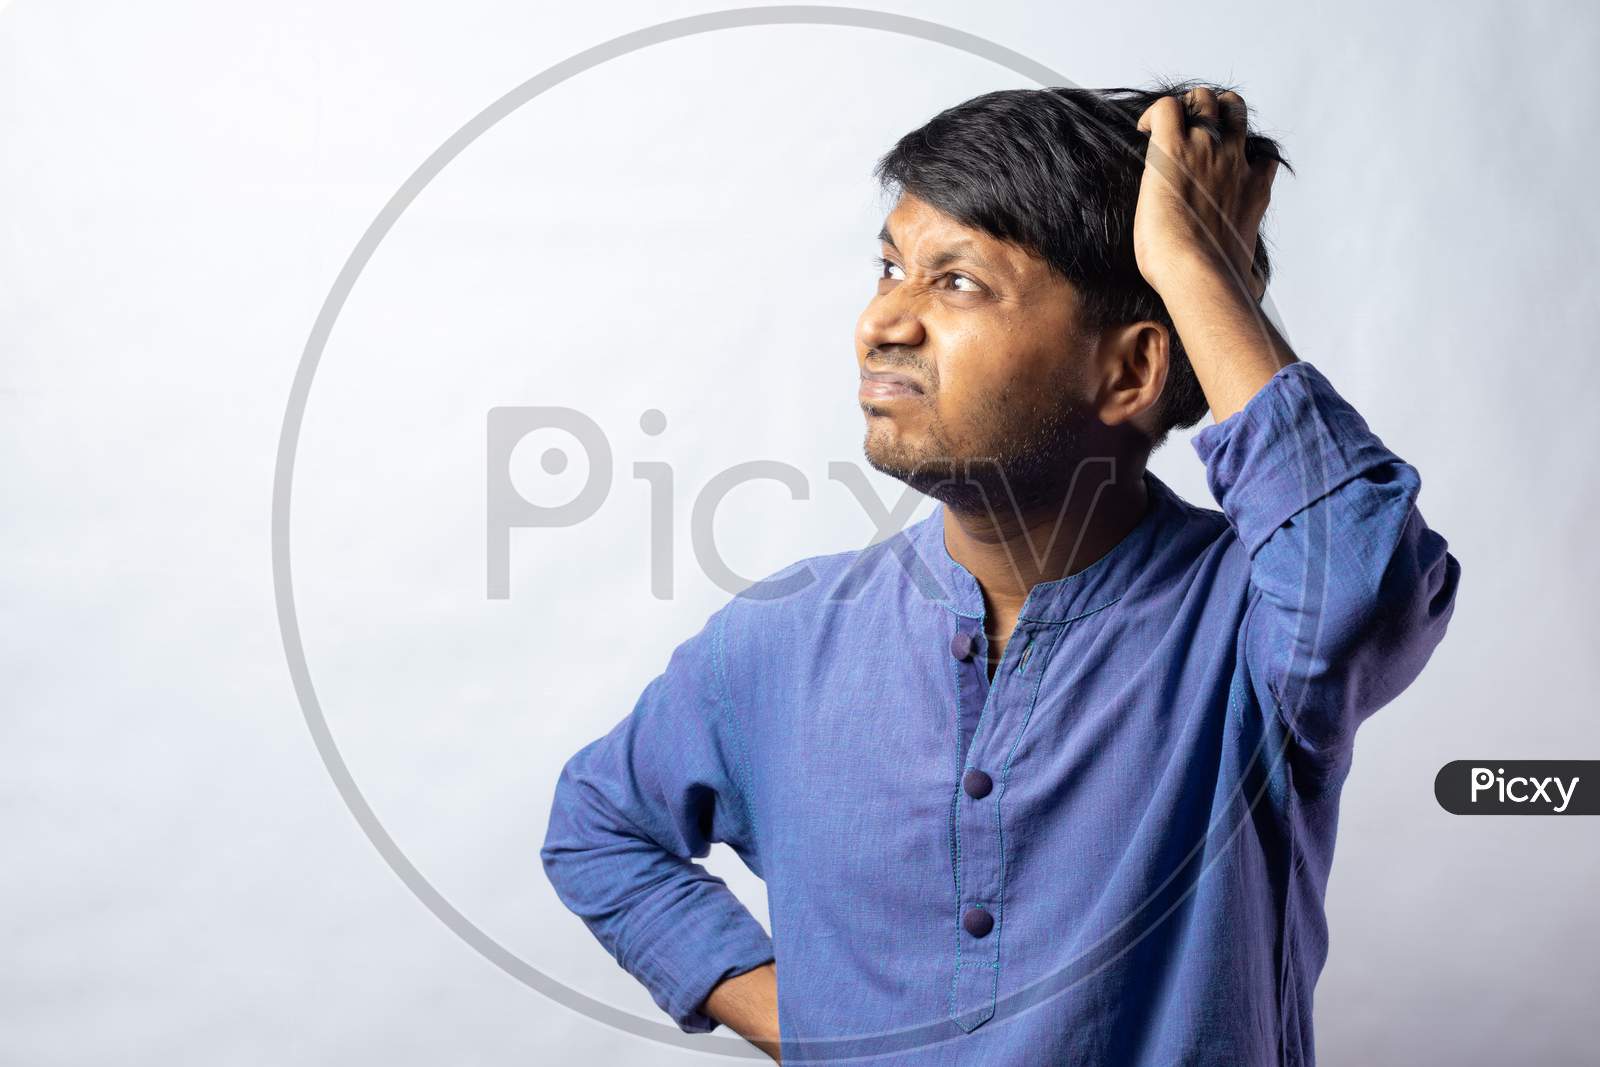 Facial Expression Of An Indian Male